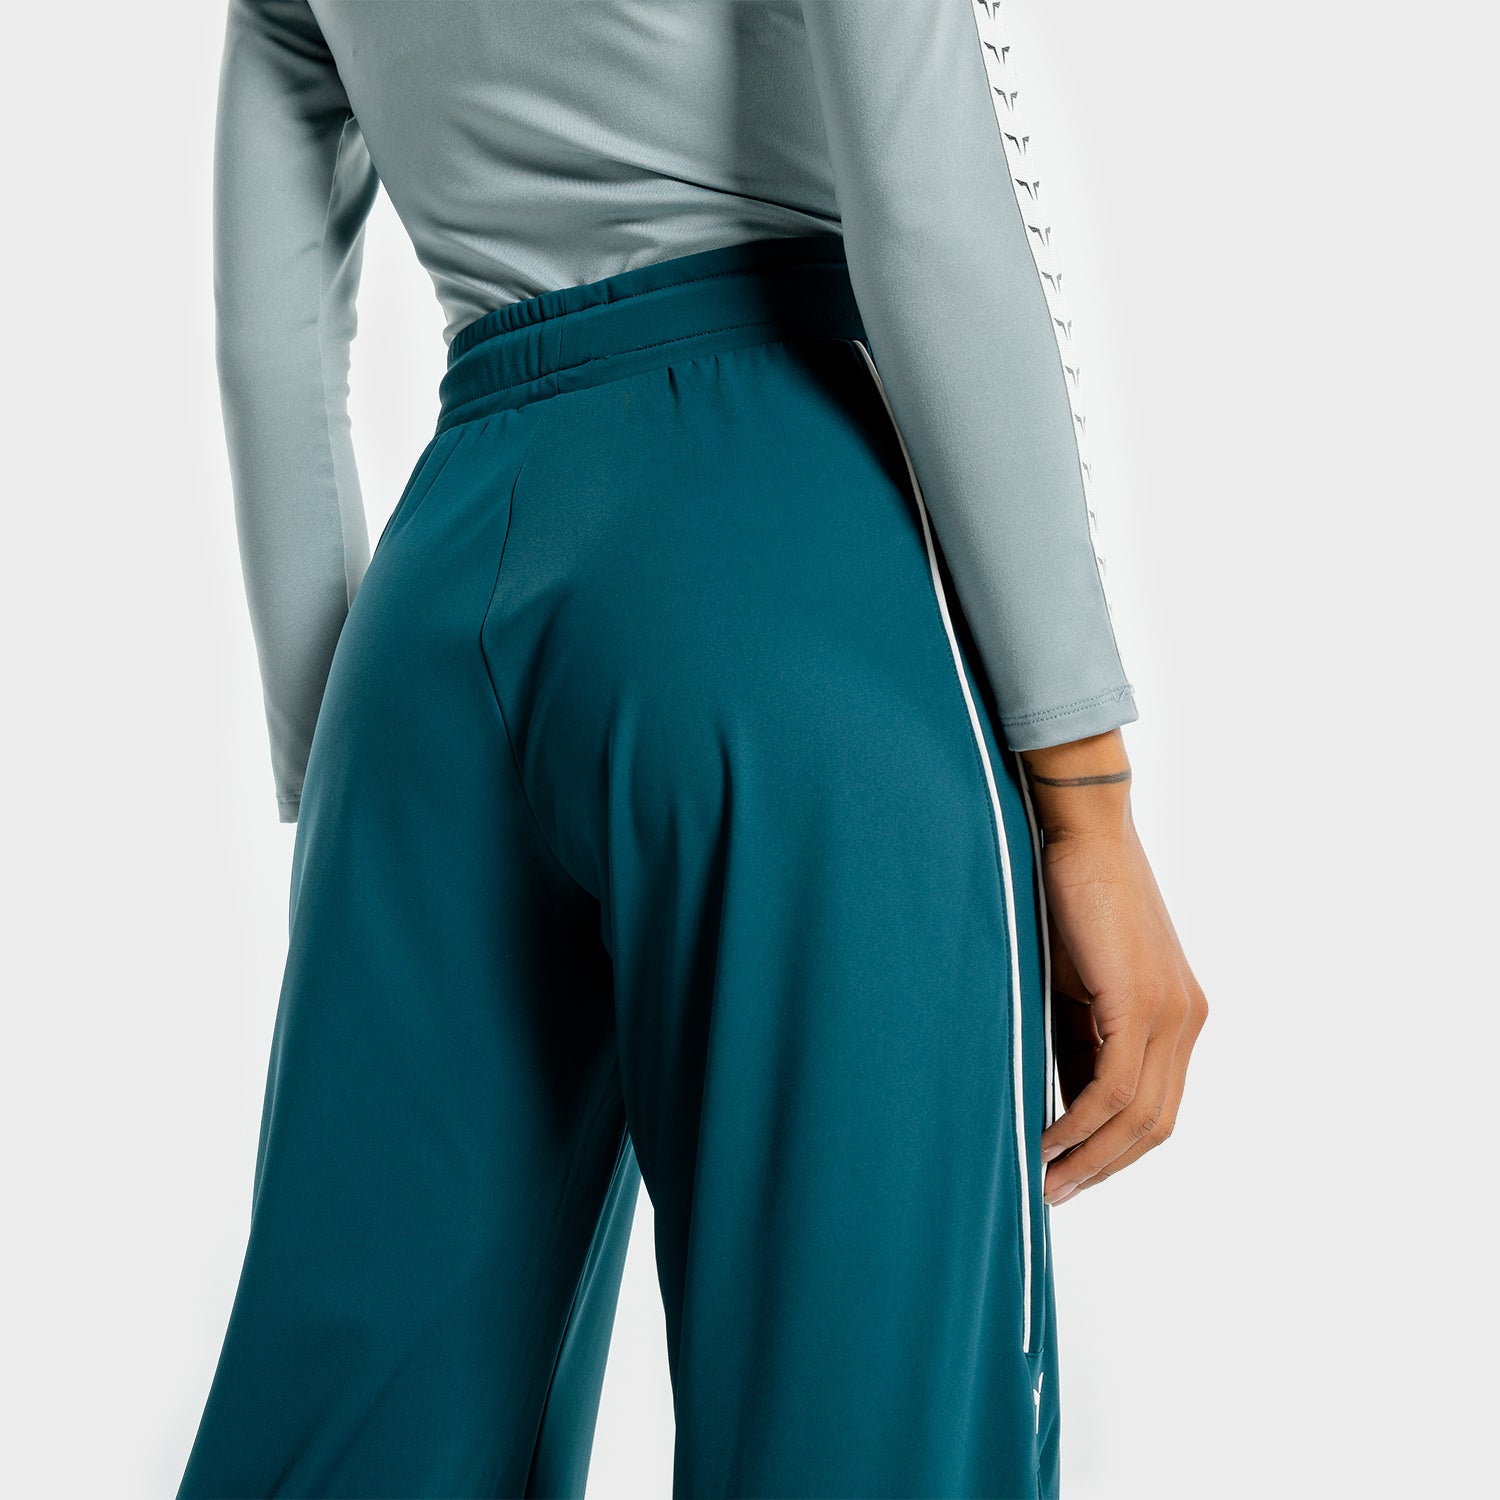 squatwolf-gym-pants-for-women-noor-wide-leg-pants-teal-workout-clothes